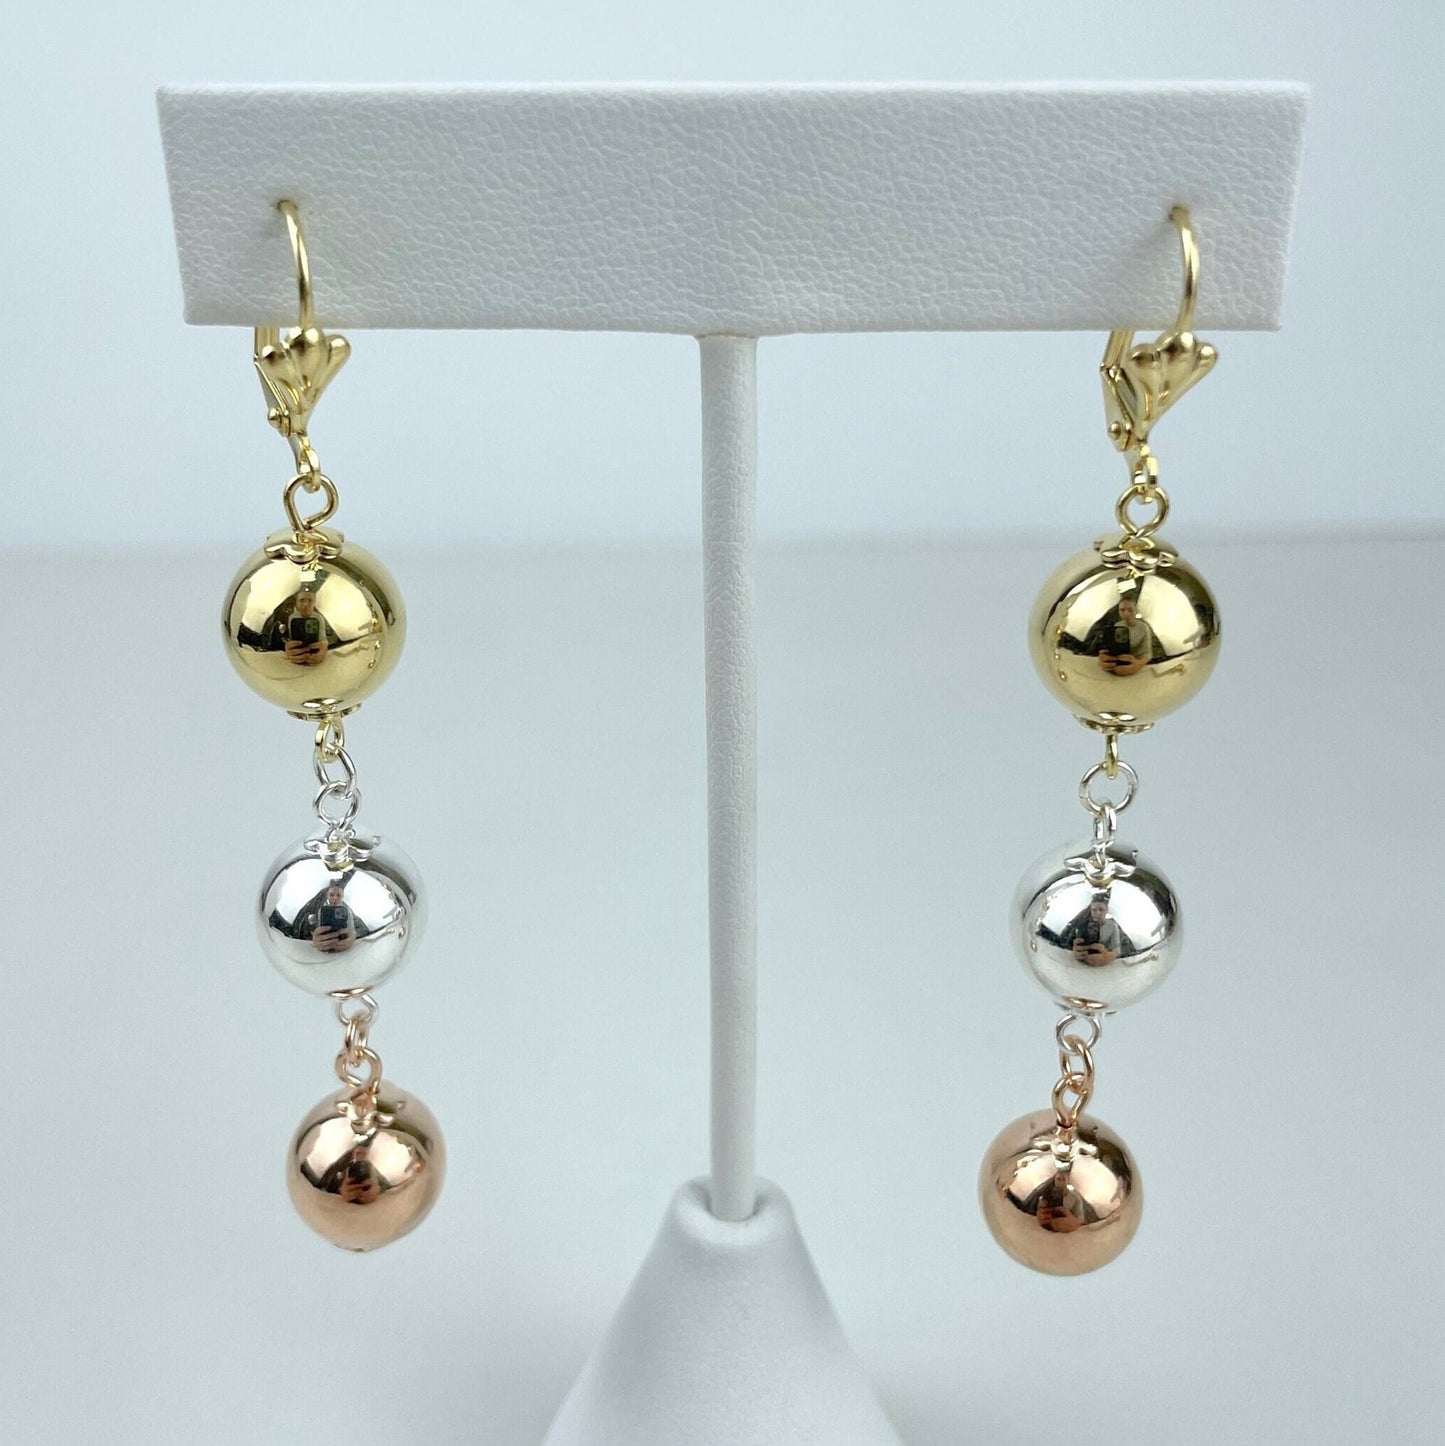 18k Gold Filled Three Tone Balls Dangle Earrings Wholesale Jewelry Making Supplies